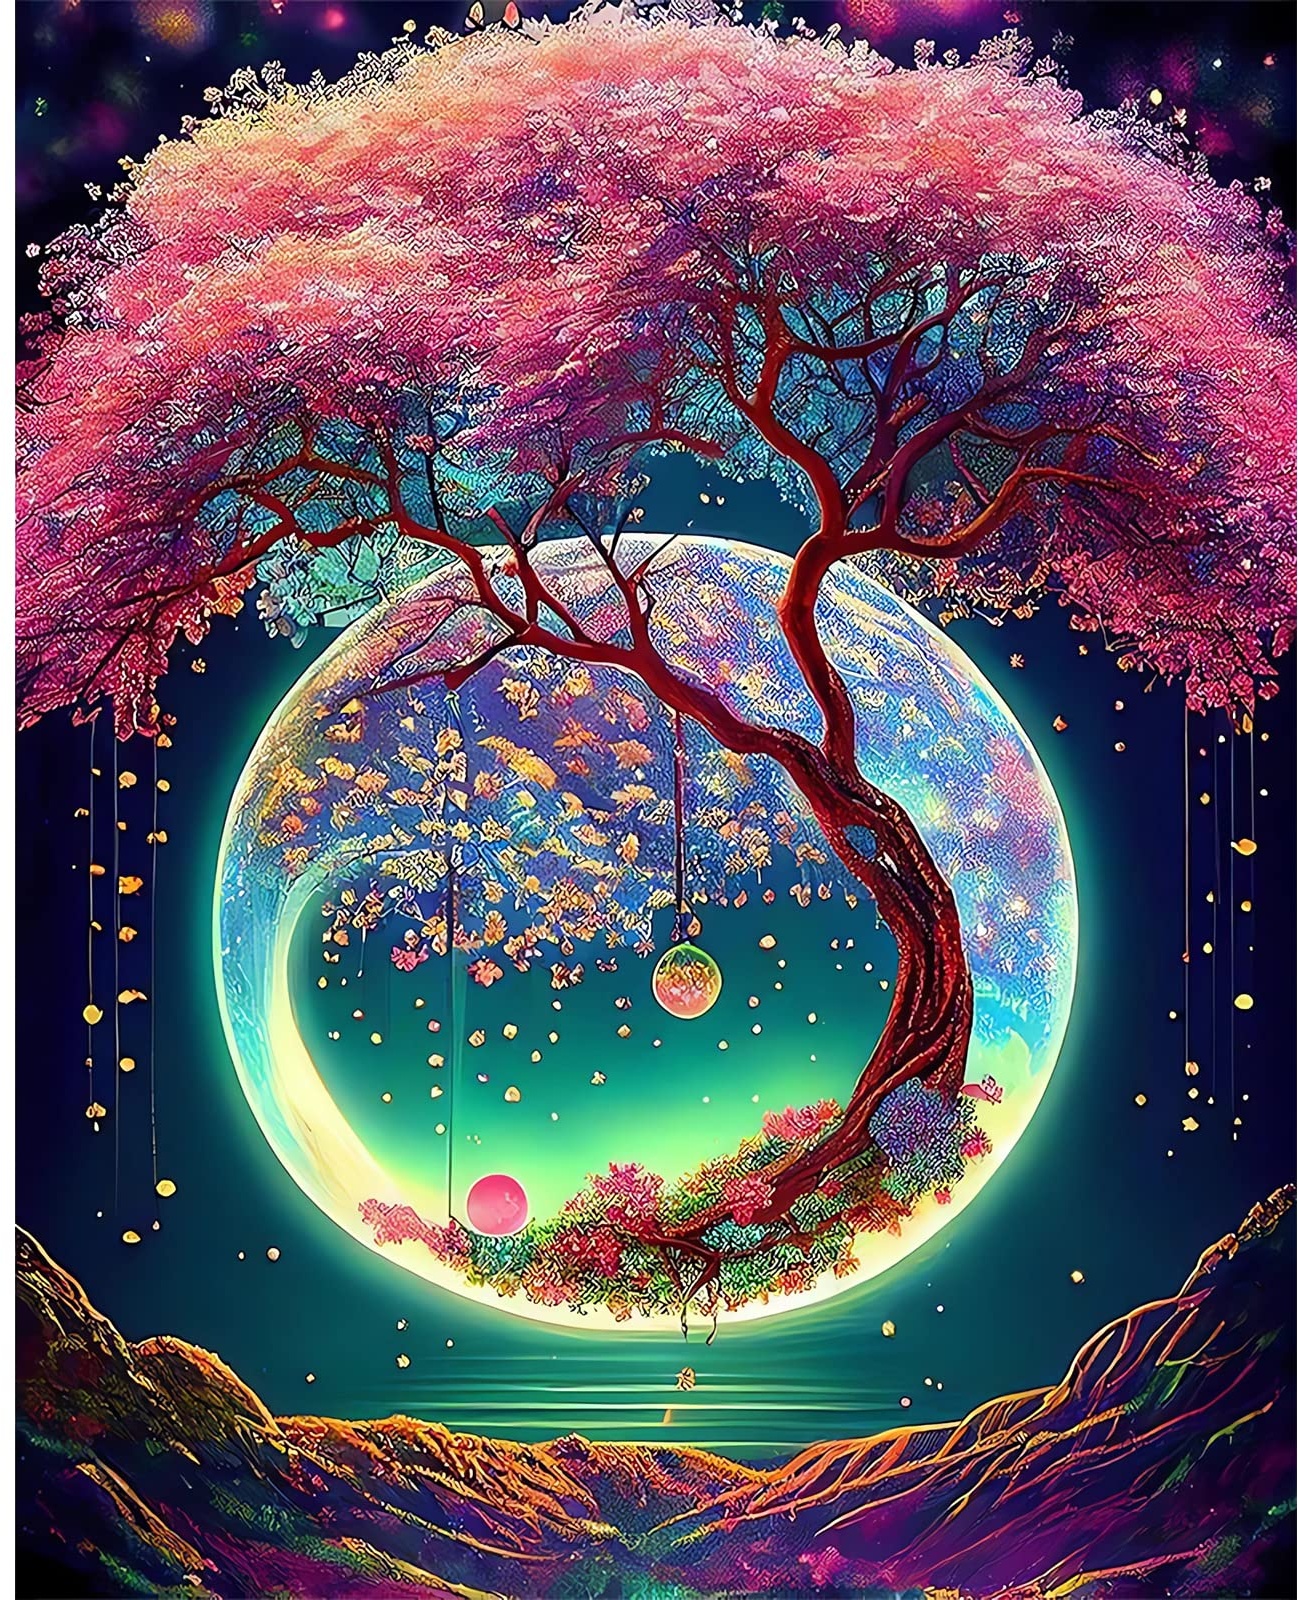 AIRDEA 5D Tree and Moon Diamond Painting Kits for Adults Beginners Round Full Kits DIY Moonlight Diamond Art Kits for Kids Landscape Diamond Painting by Number Kits Gem Painting Art 12x16 inch